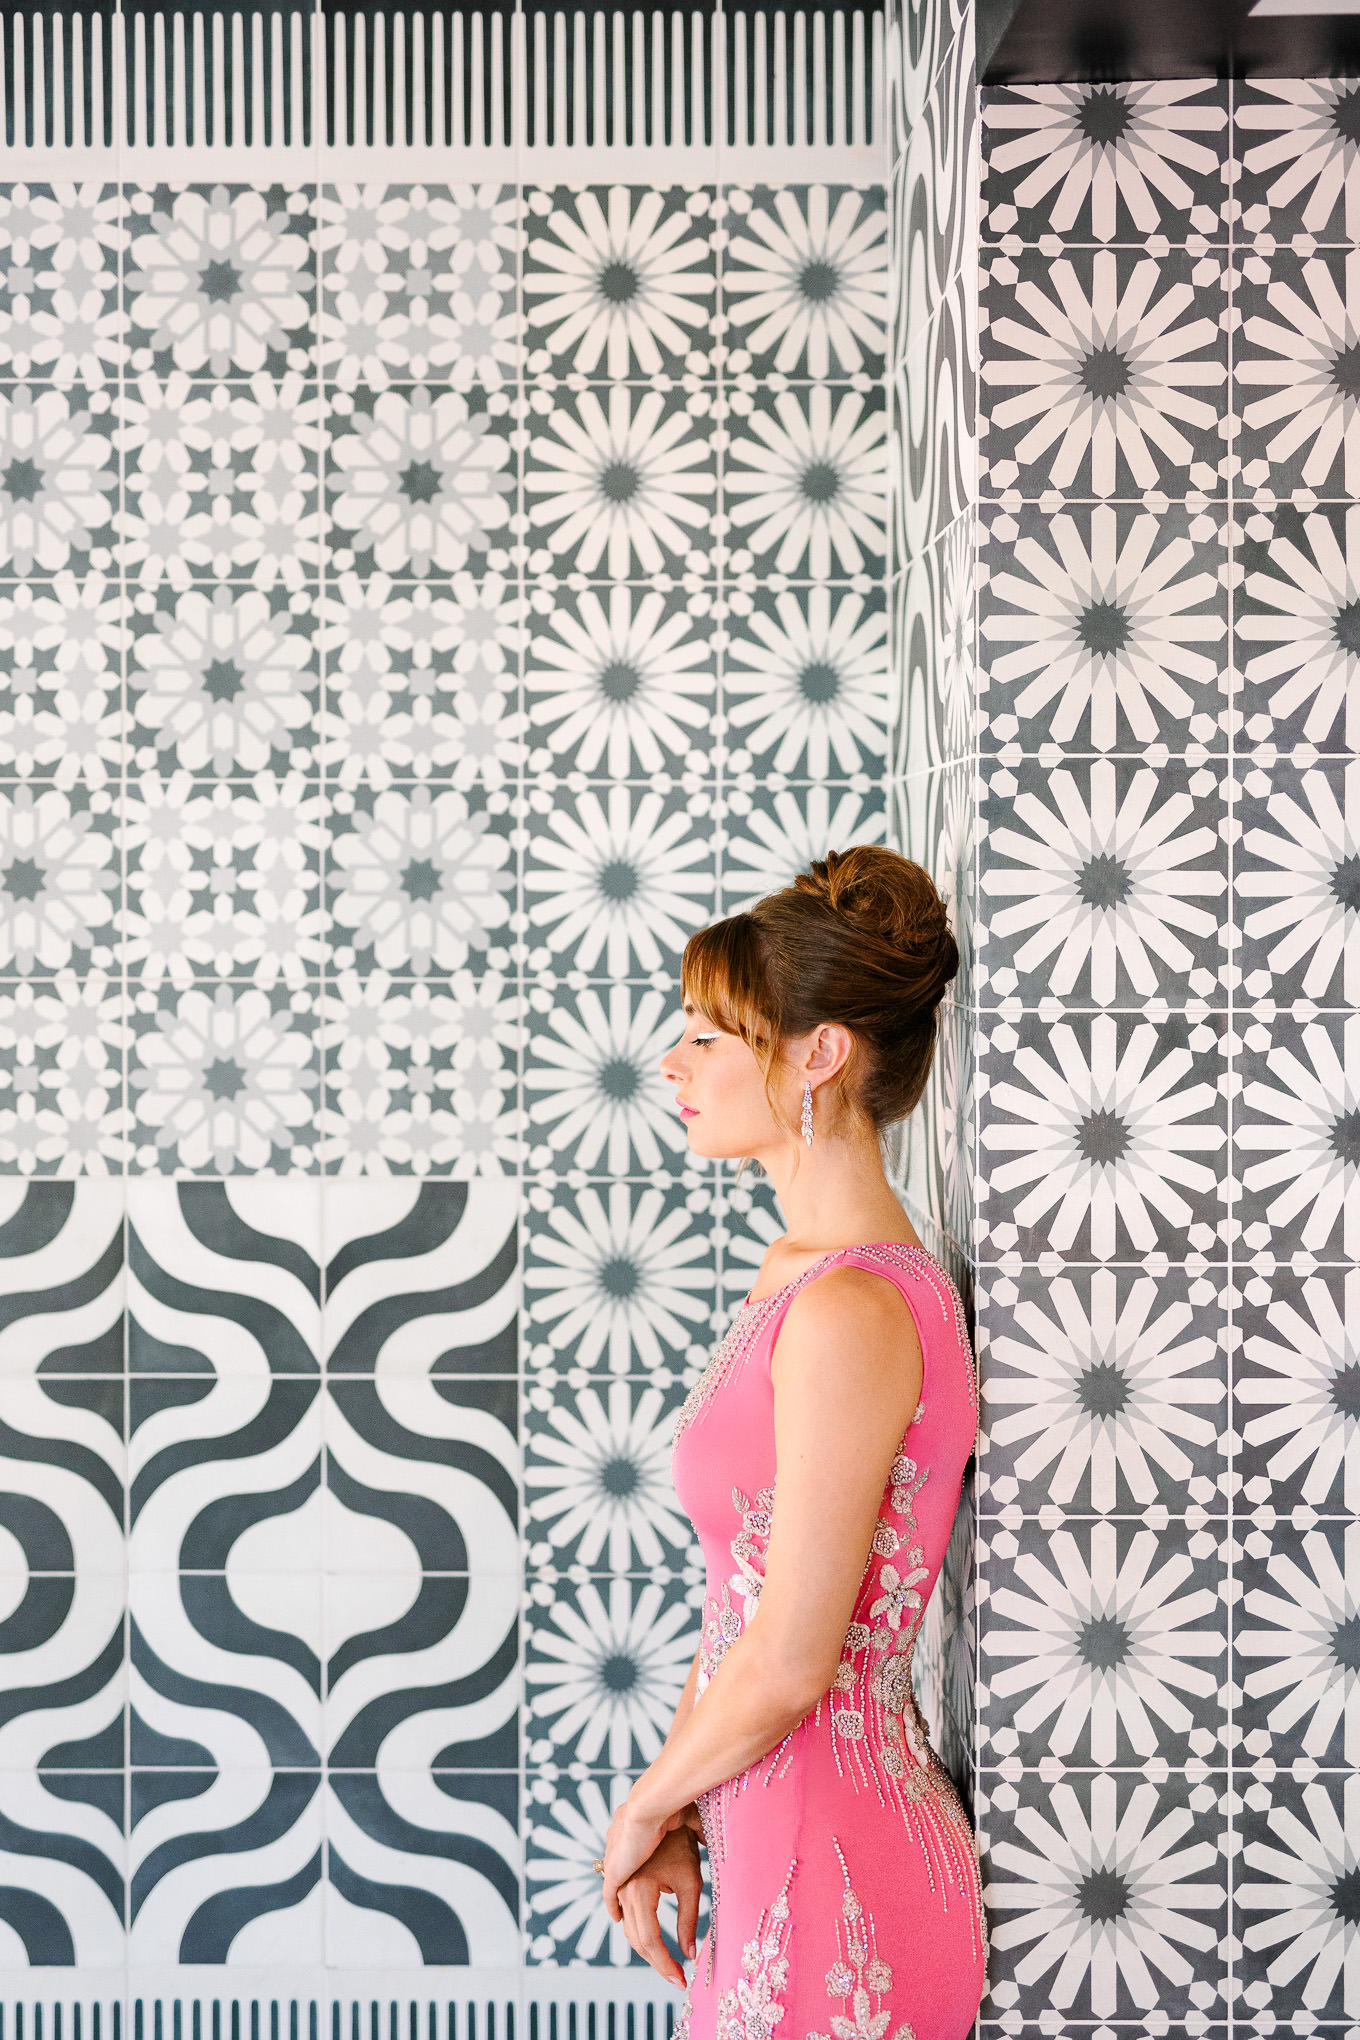 Beaded pink Naeem Khan gown in Sands Hotel tiled lobby | Kindred Presets x Mary Costa Photography Sands Hotel Ad Campaign | Colorful Palm Springs wedding photography | #palmspringsphotographer #lightroompresets #sandshotel #pinkhotel   Source: Mary Costa Photography | Los Angeles